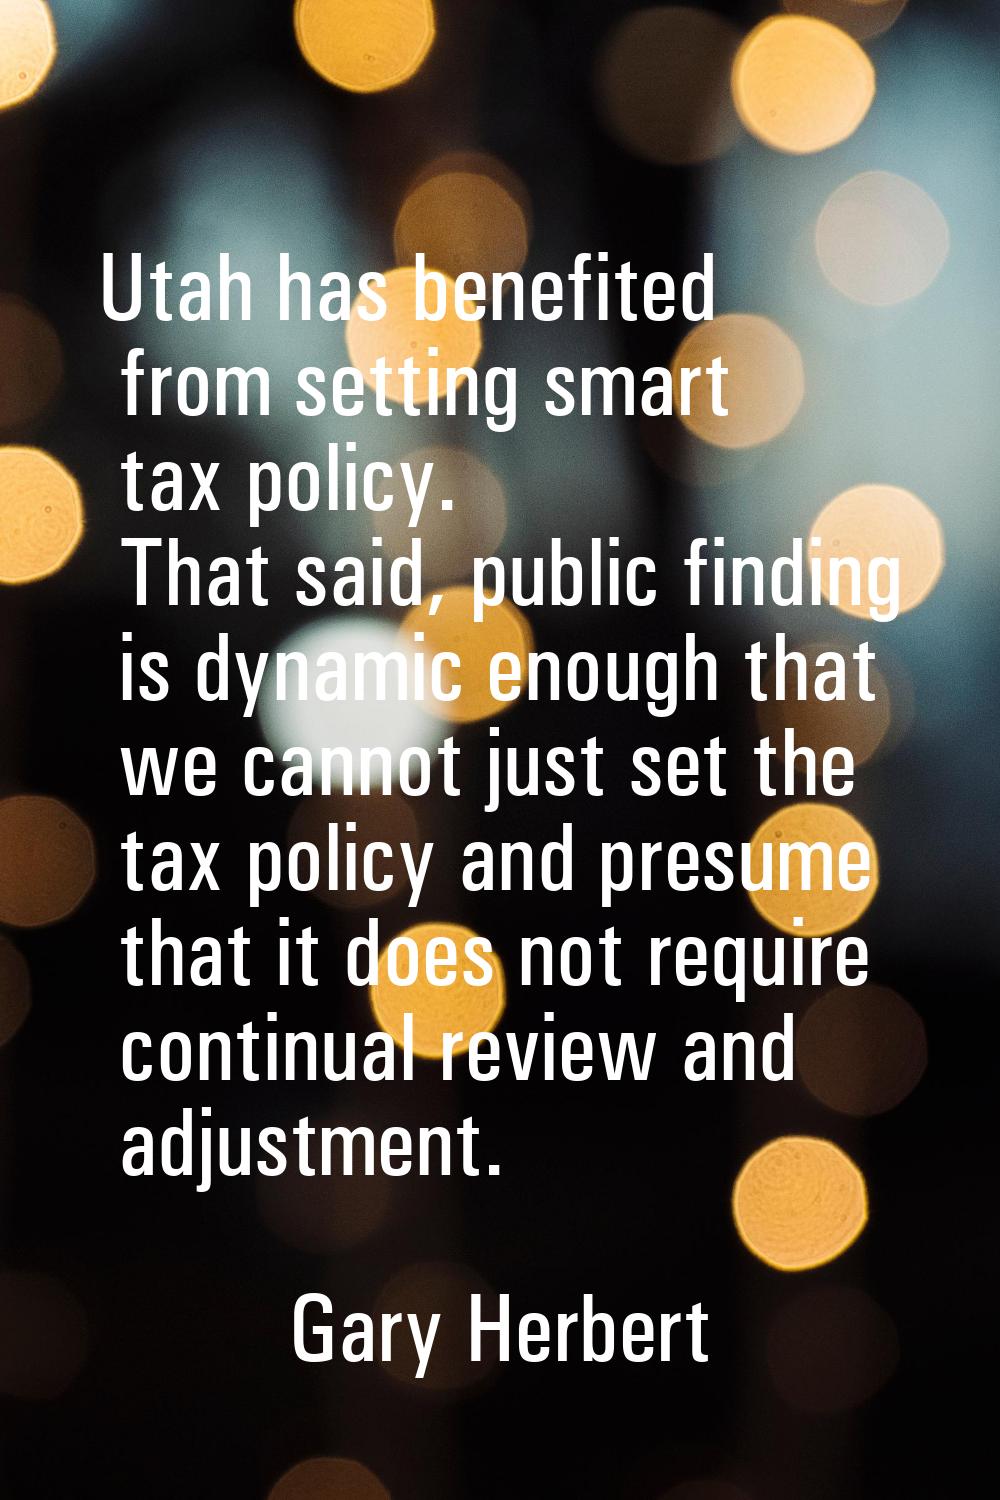 Utah has benefited from setting smart tax policy. That said, public finding is dynamic enough that 